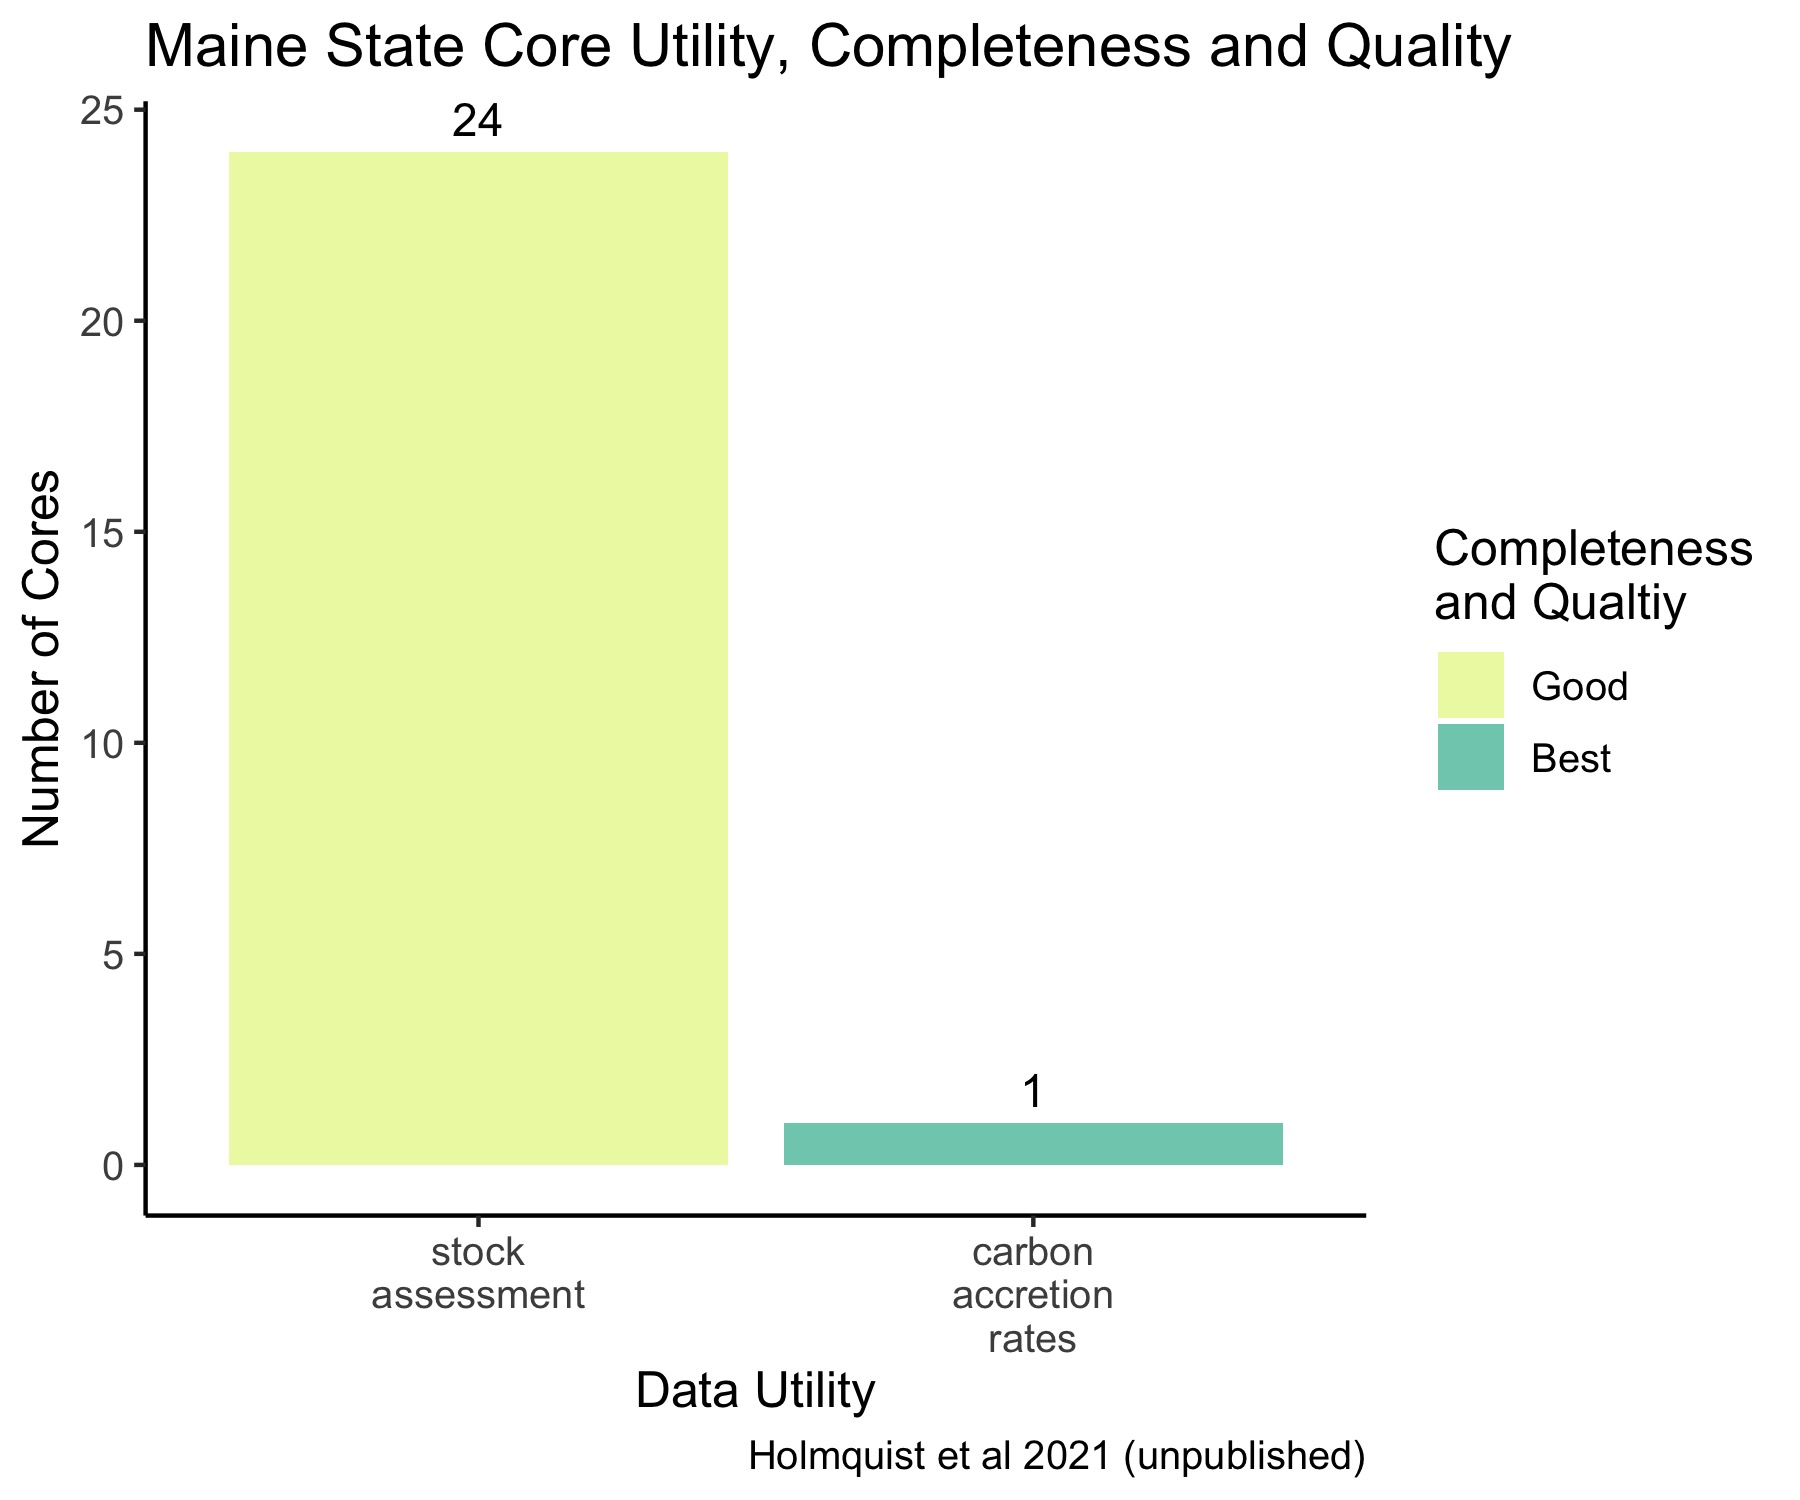 Maine State Core Data Utility, Completeness, and Quality.